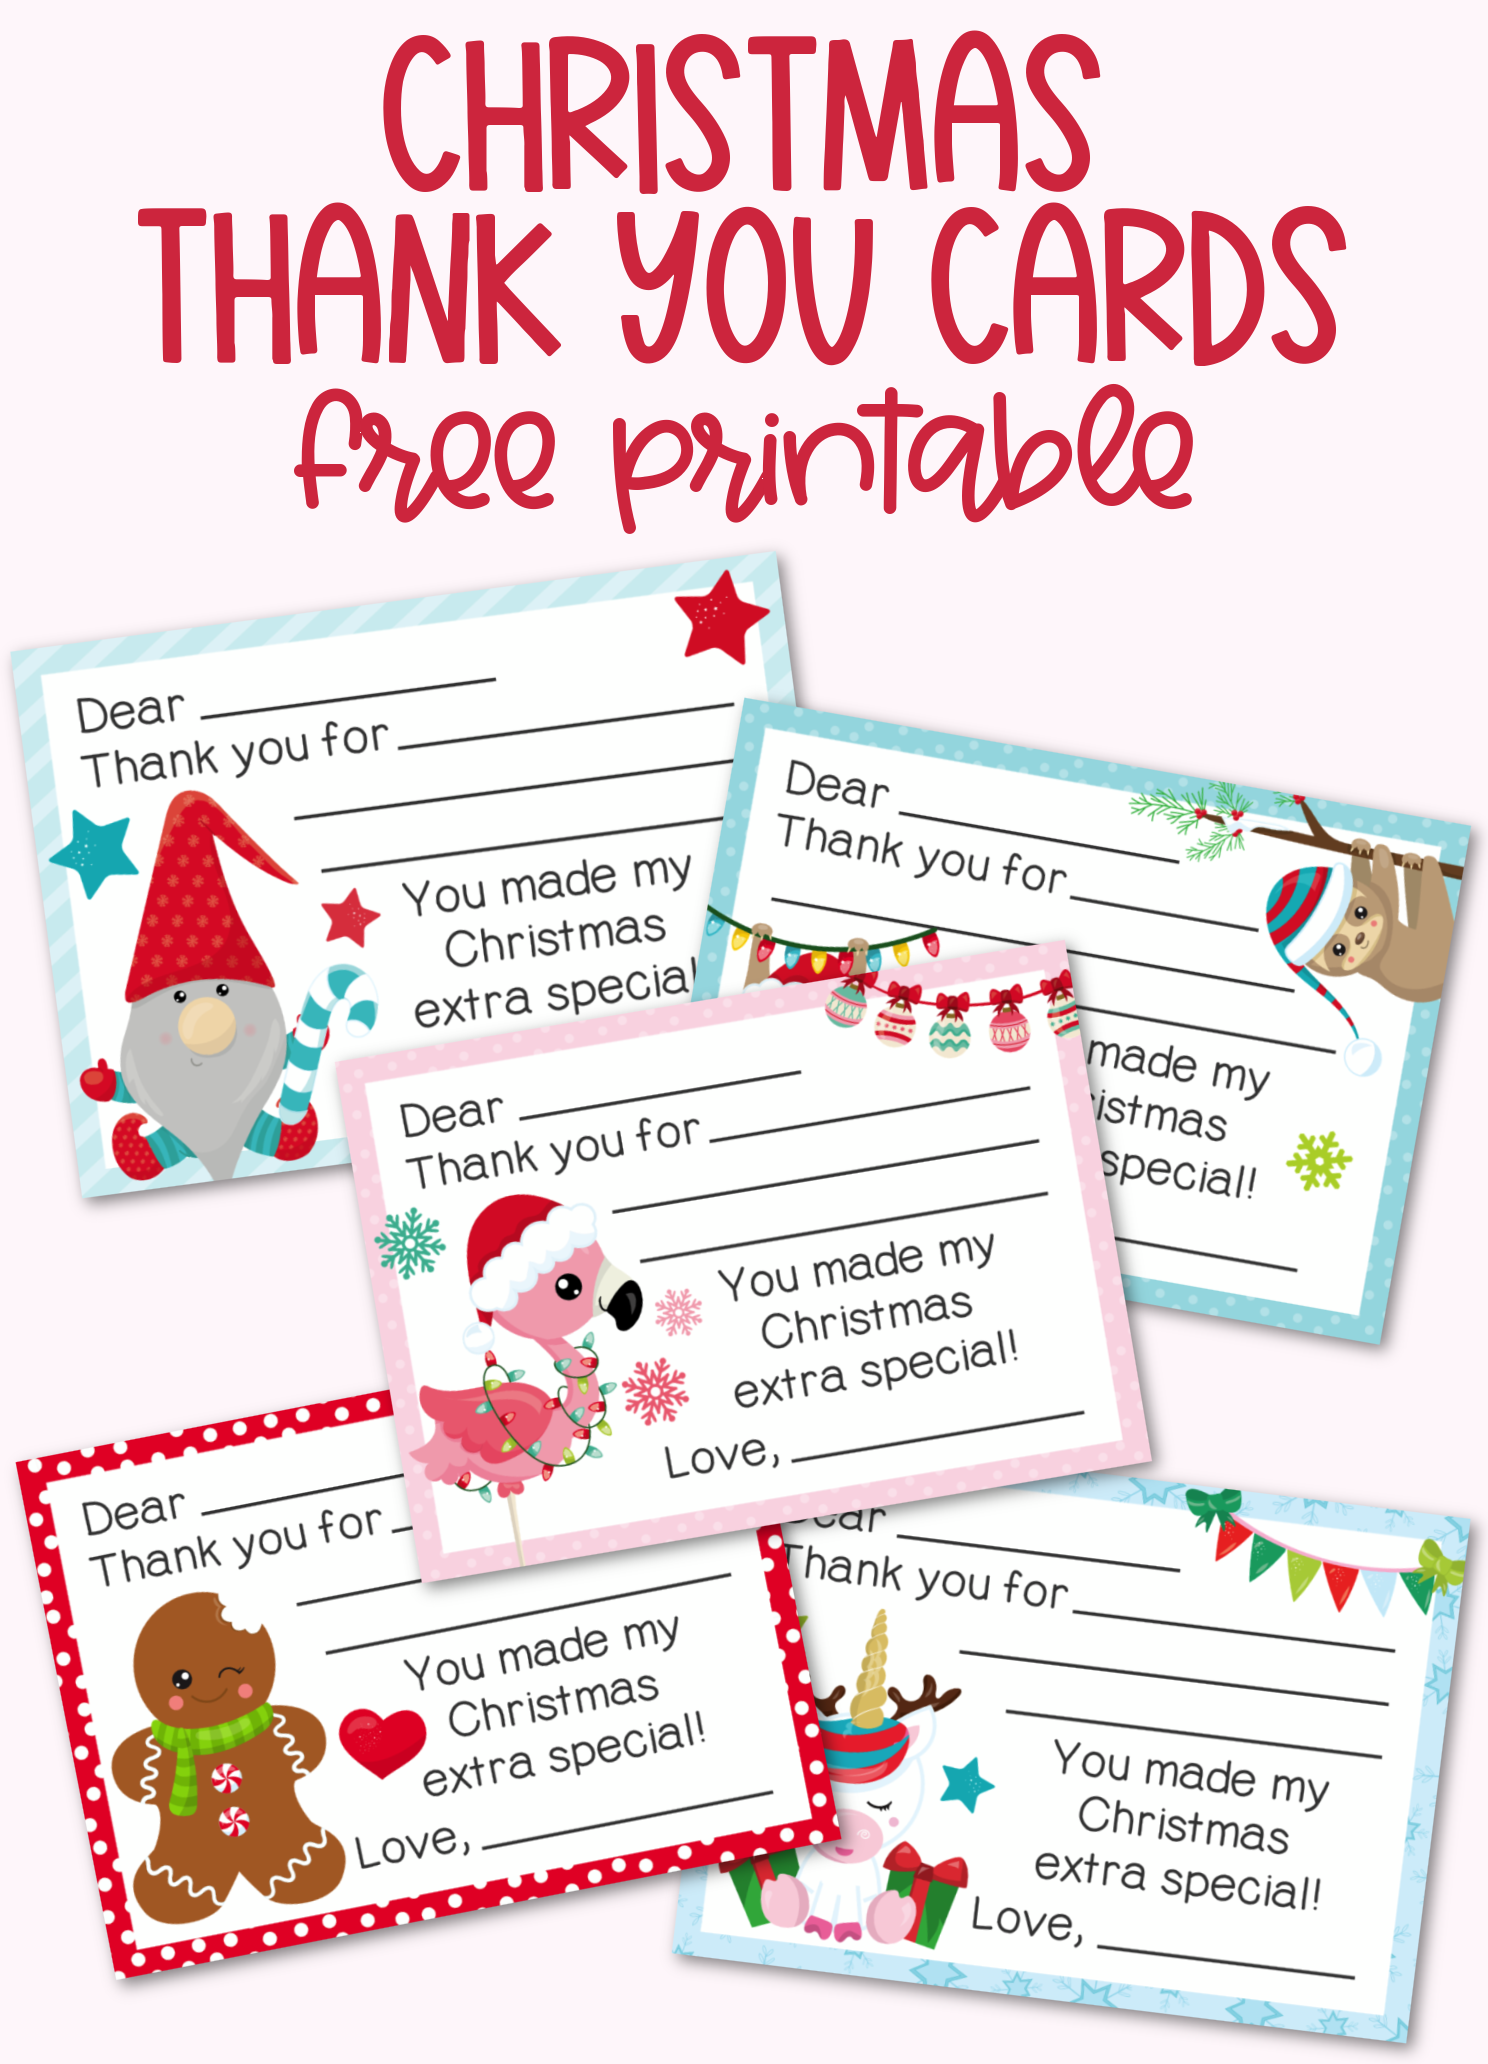 A collection of 8 Free Fill-in-the-Blank Christmas Thank You Cards